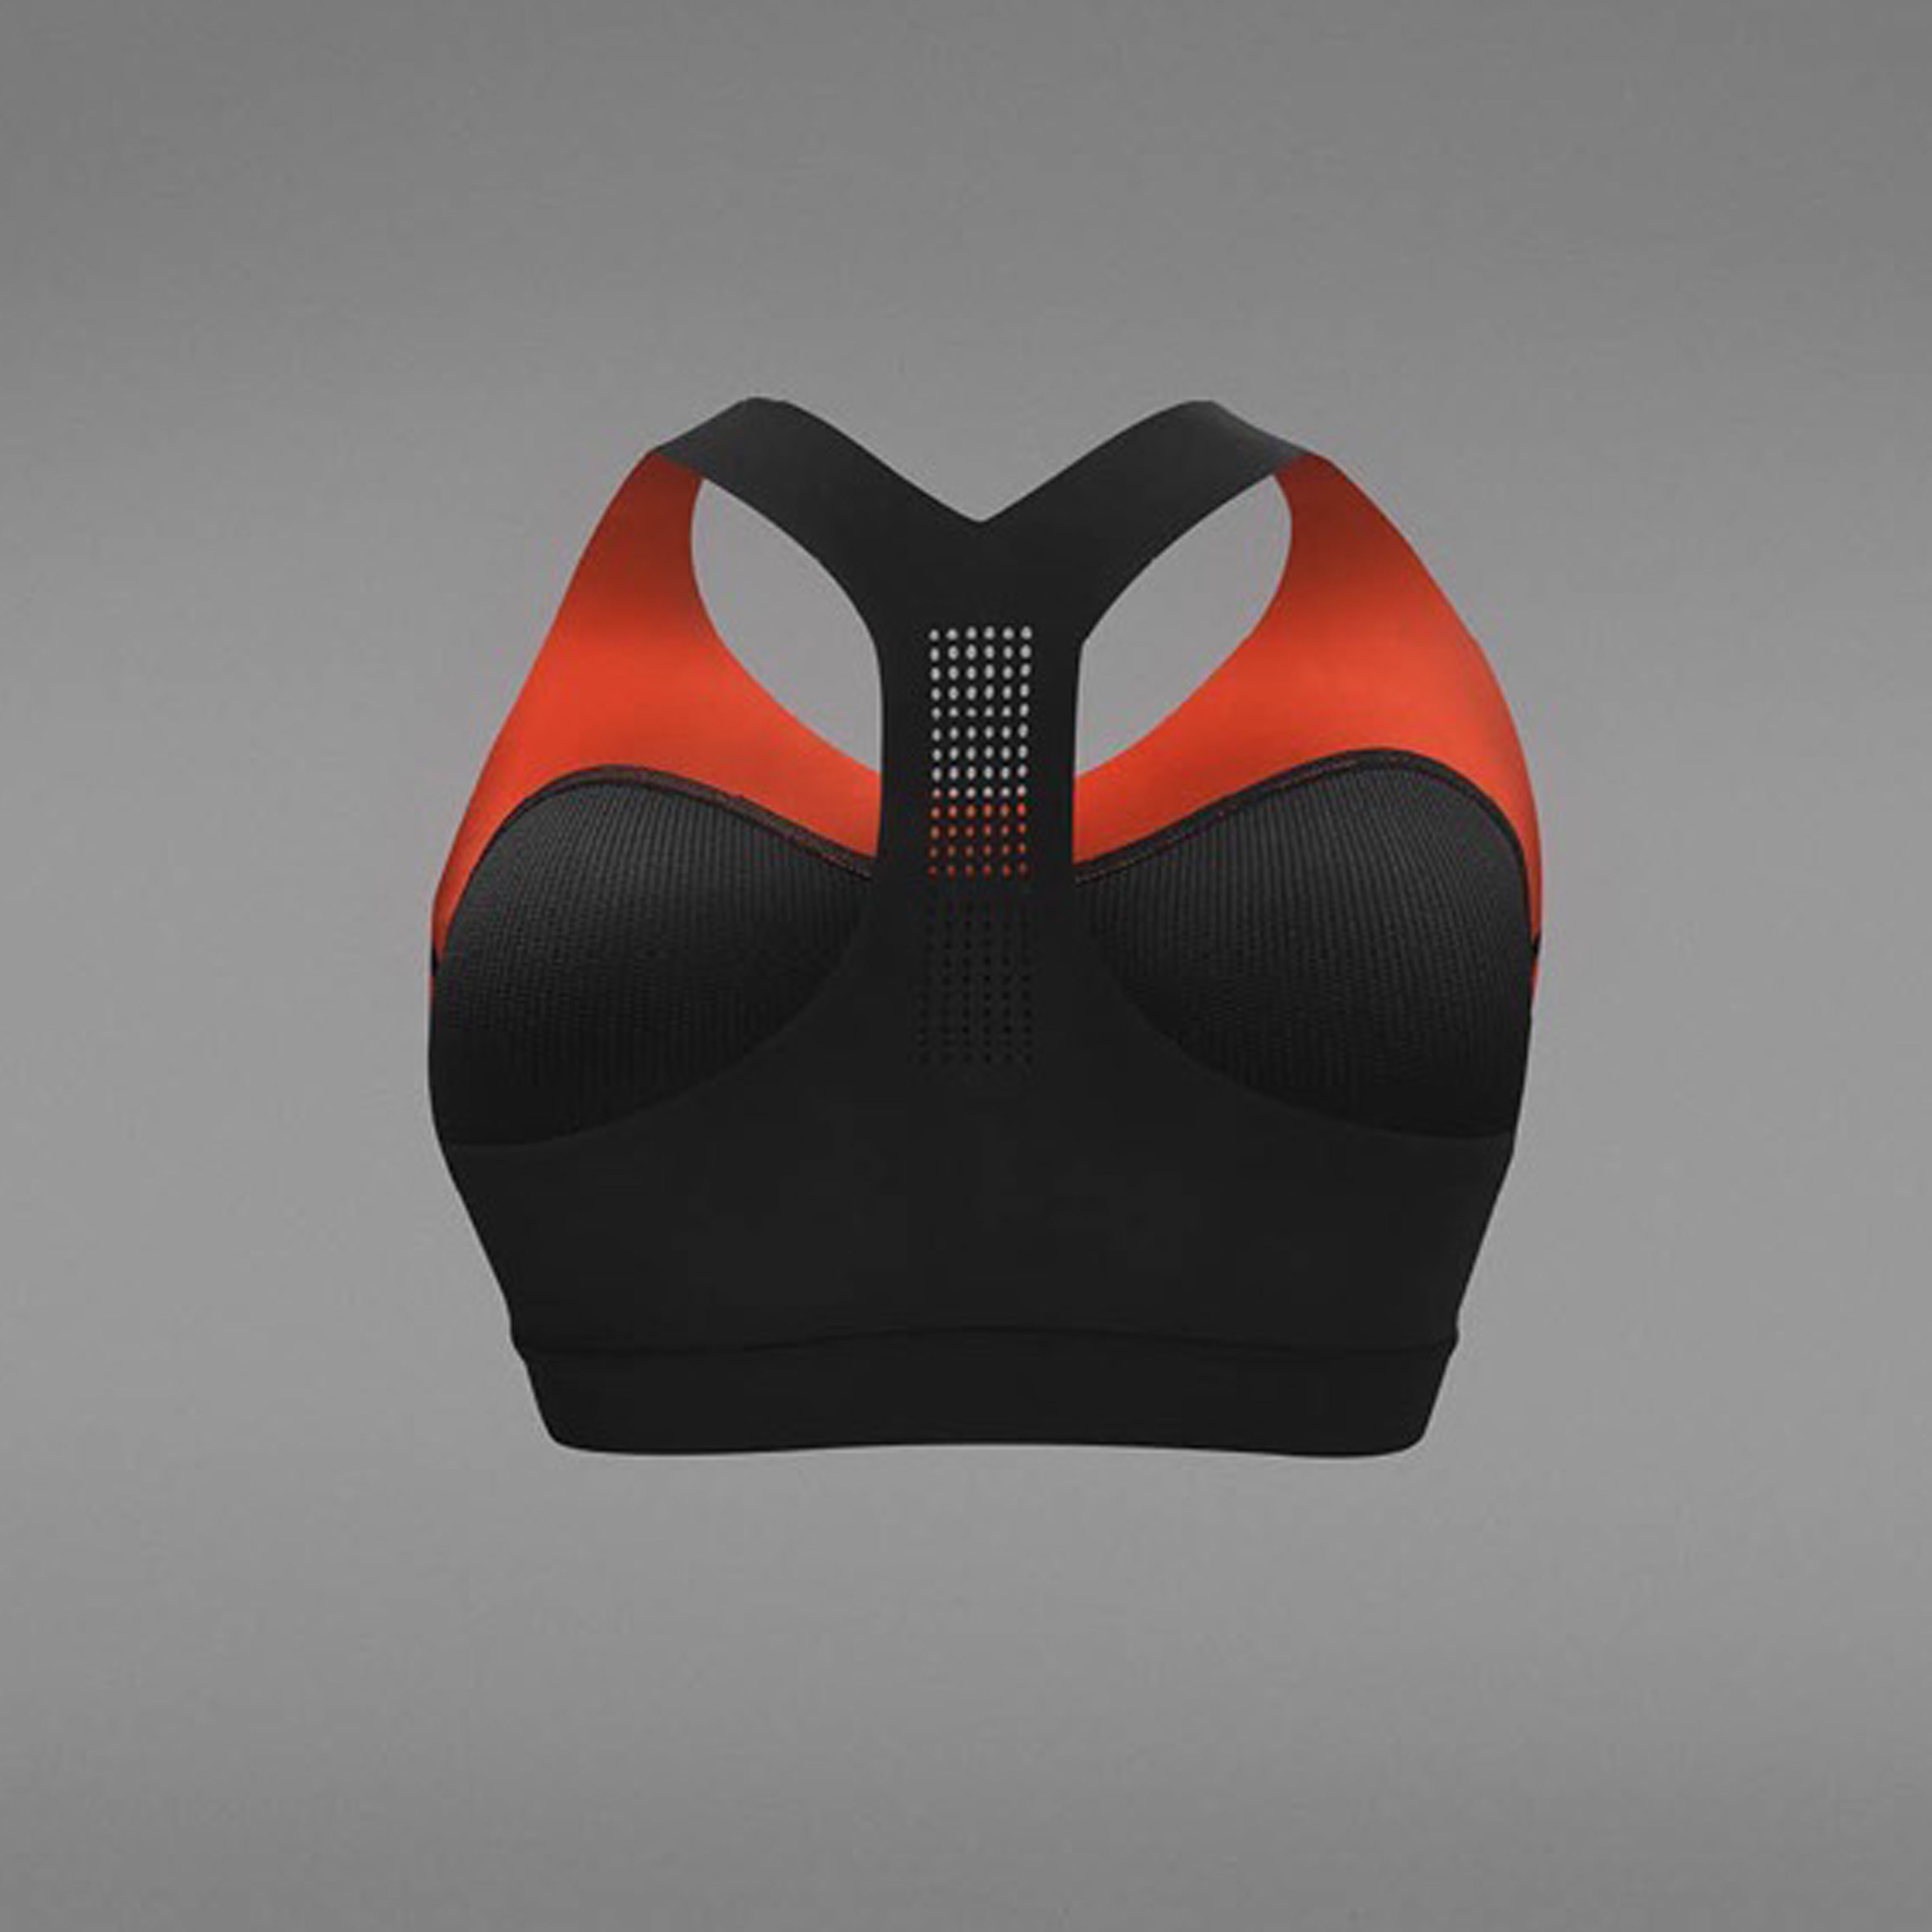 Reebok's gel-infused PureMove sports bra firms up during movement